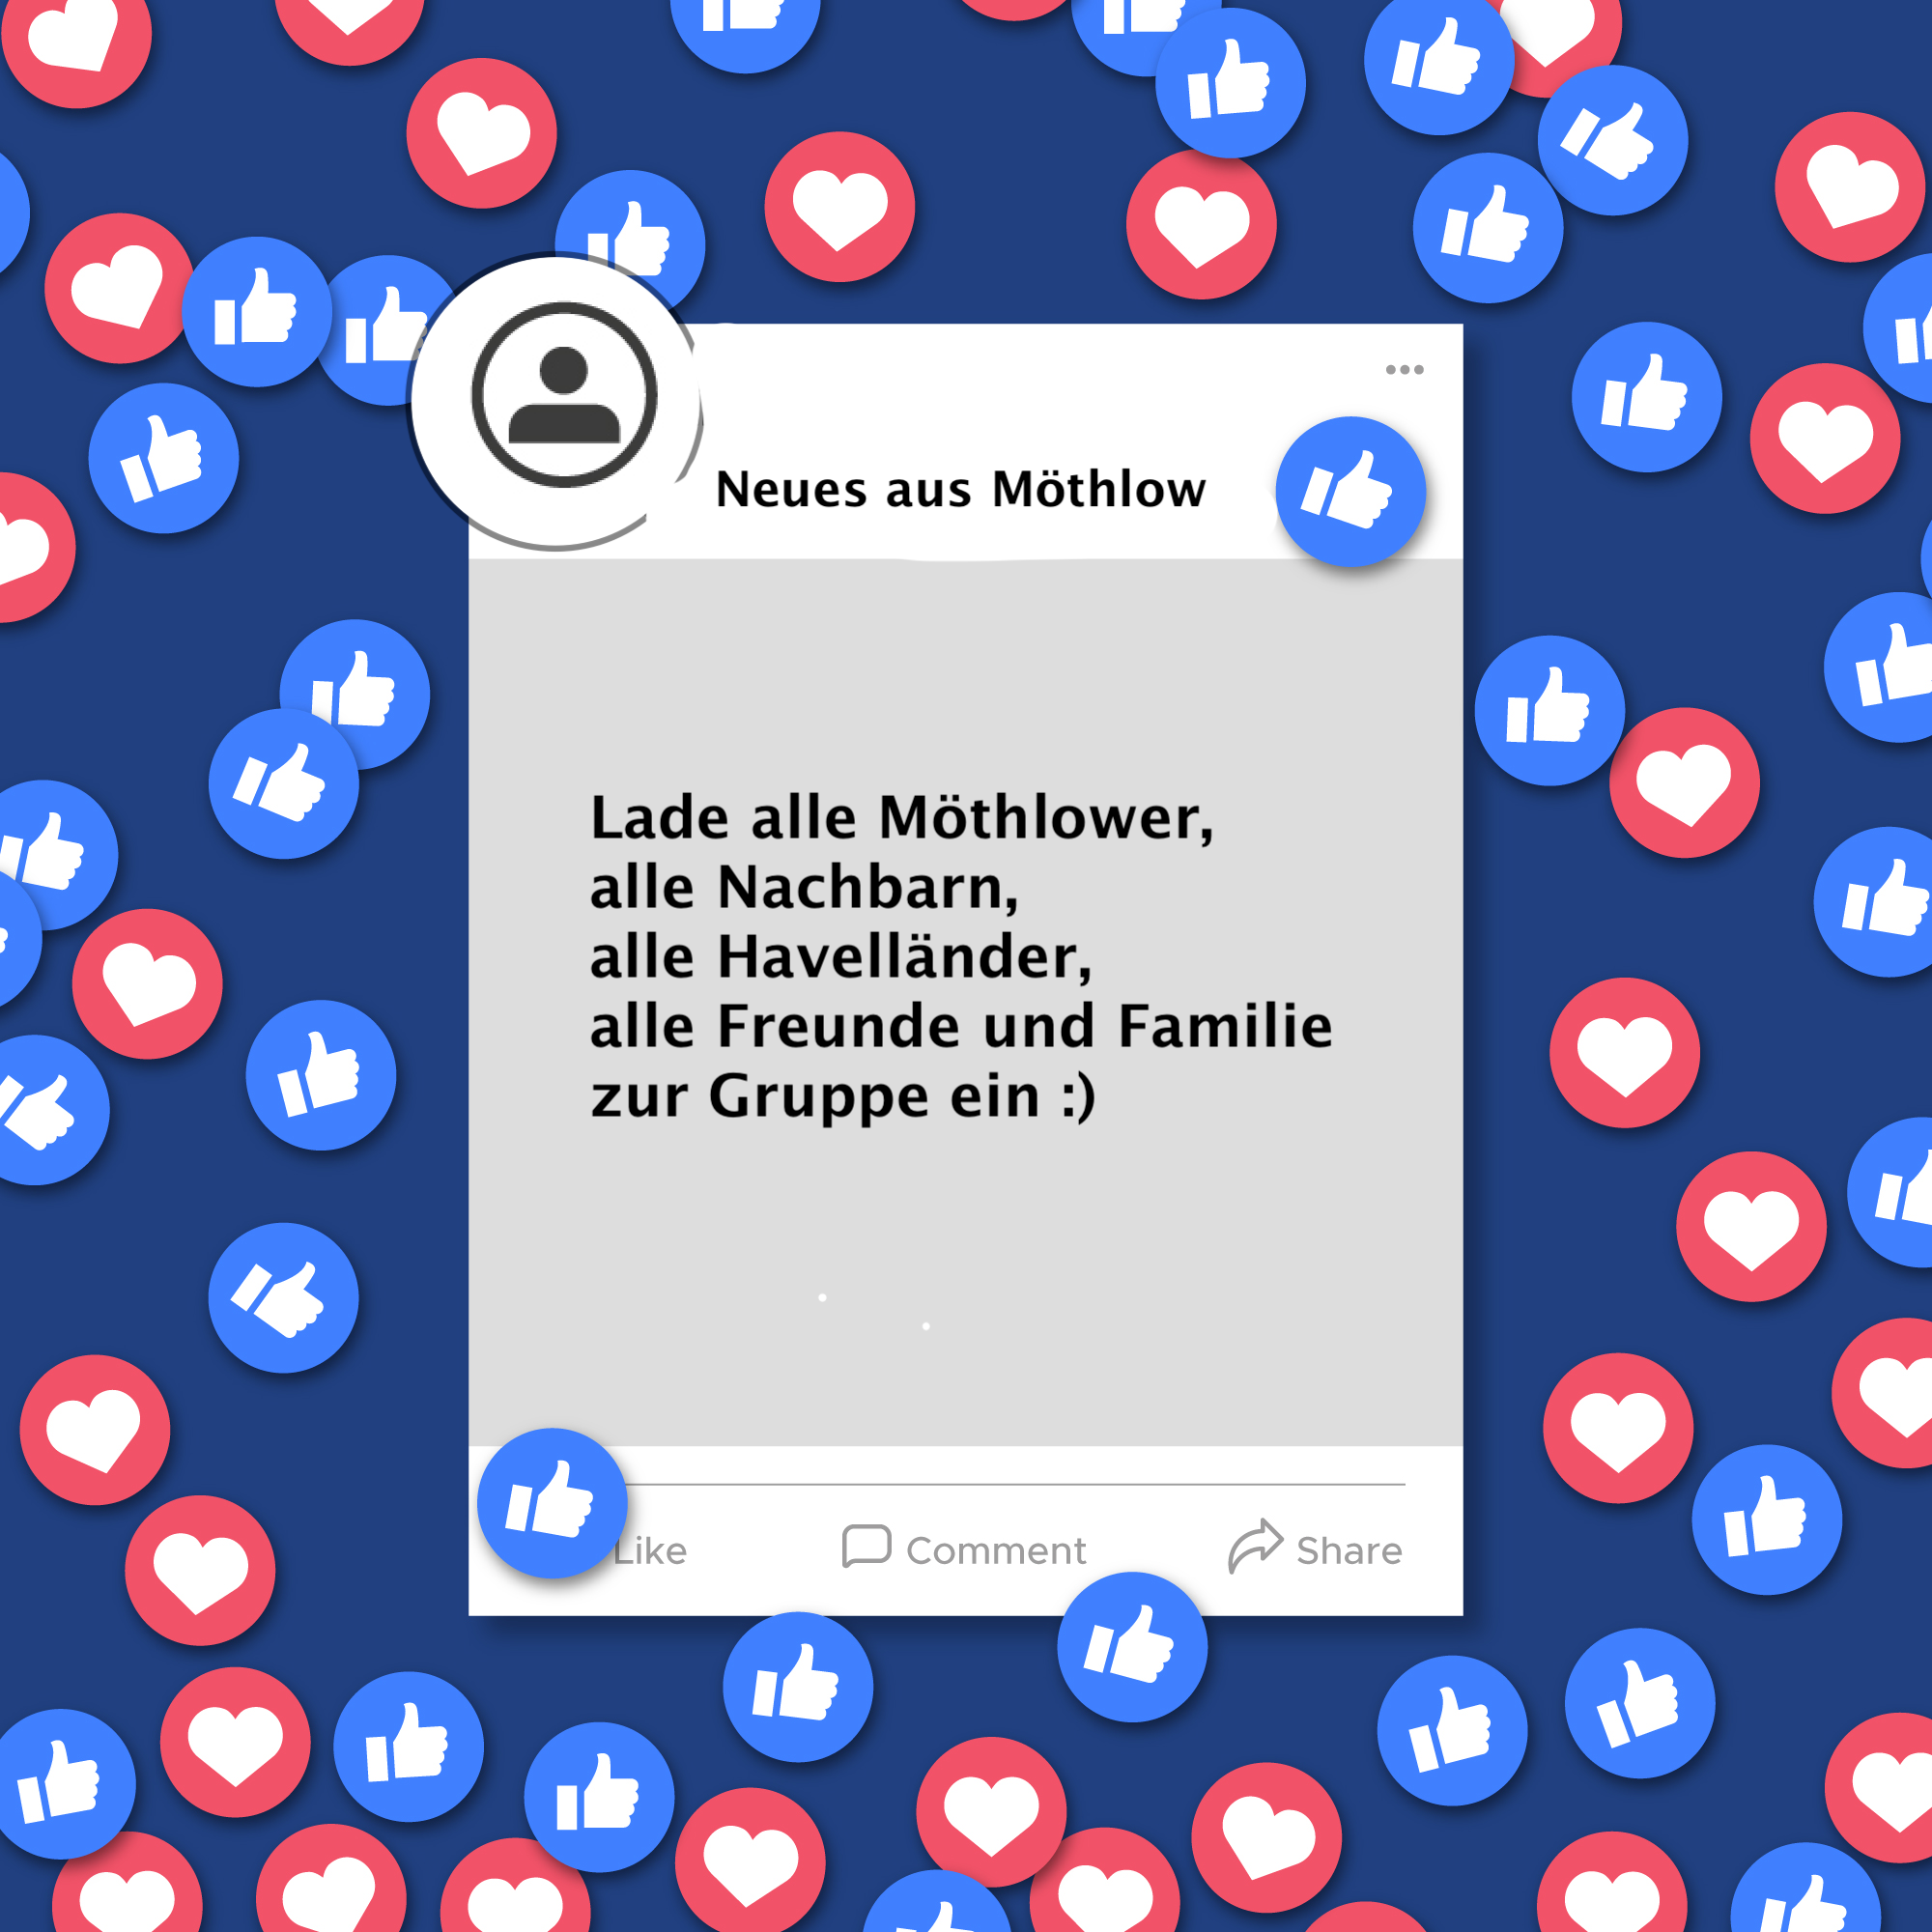 You are currently viewing „Neues aus Möthlow“ – unsere Facebook Gruppe